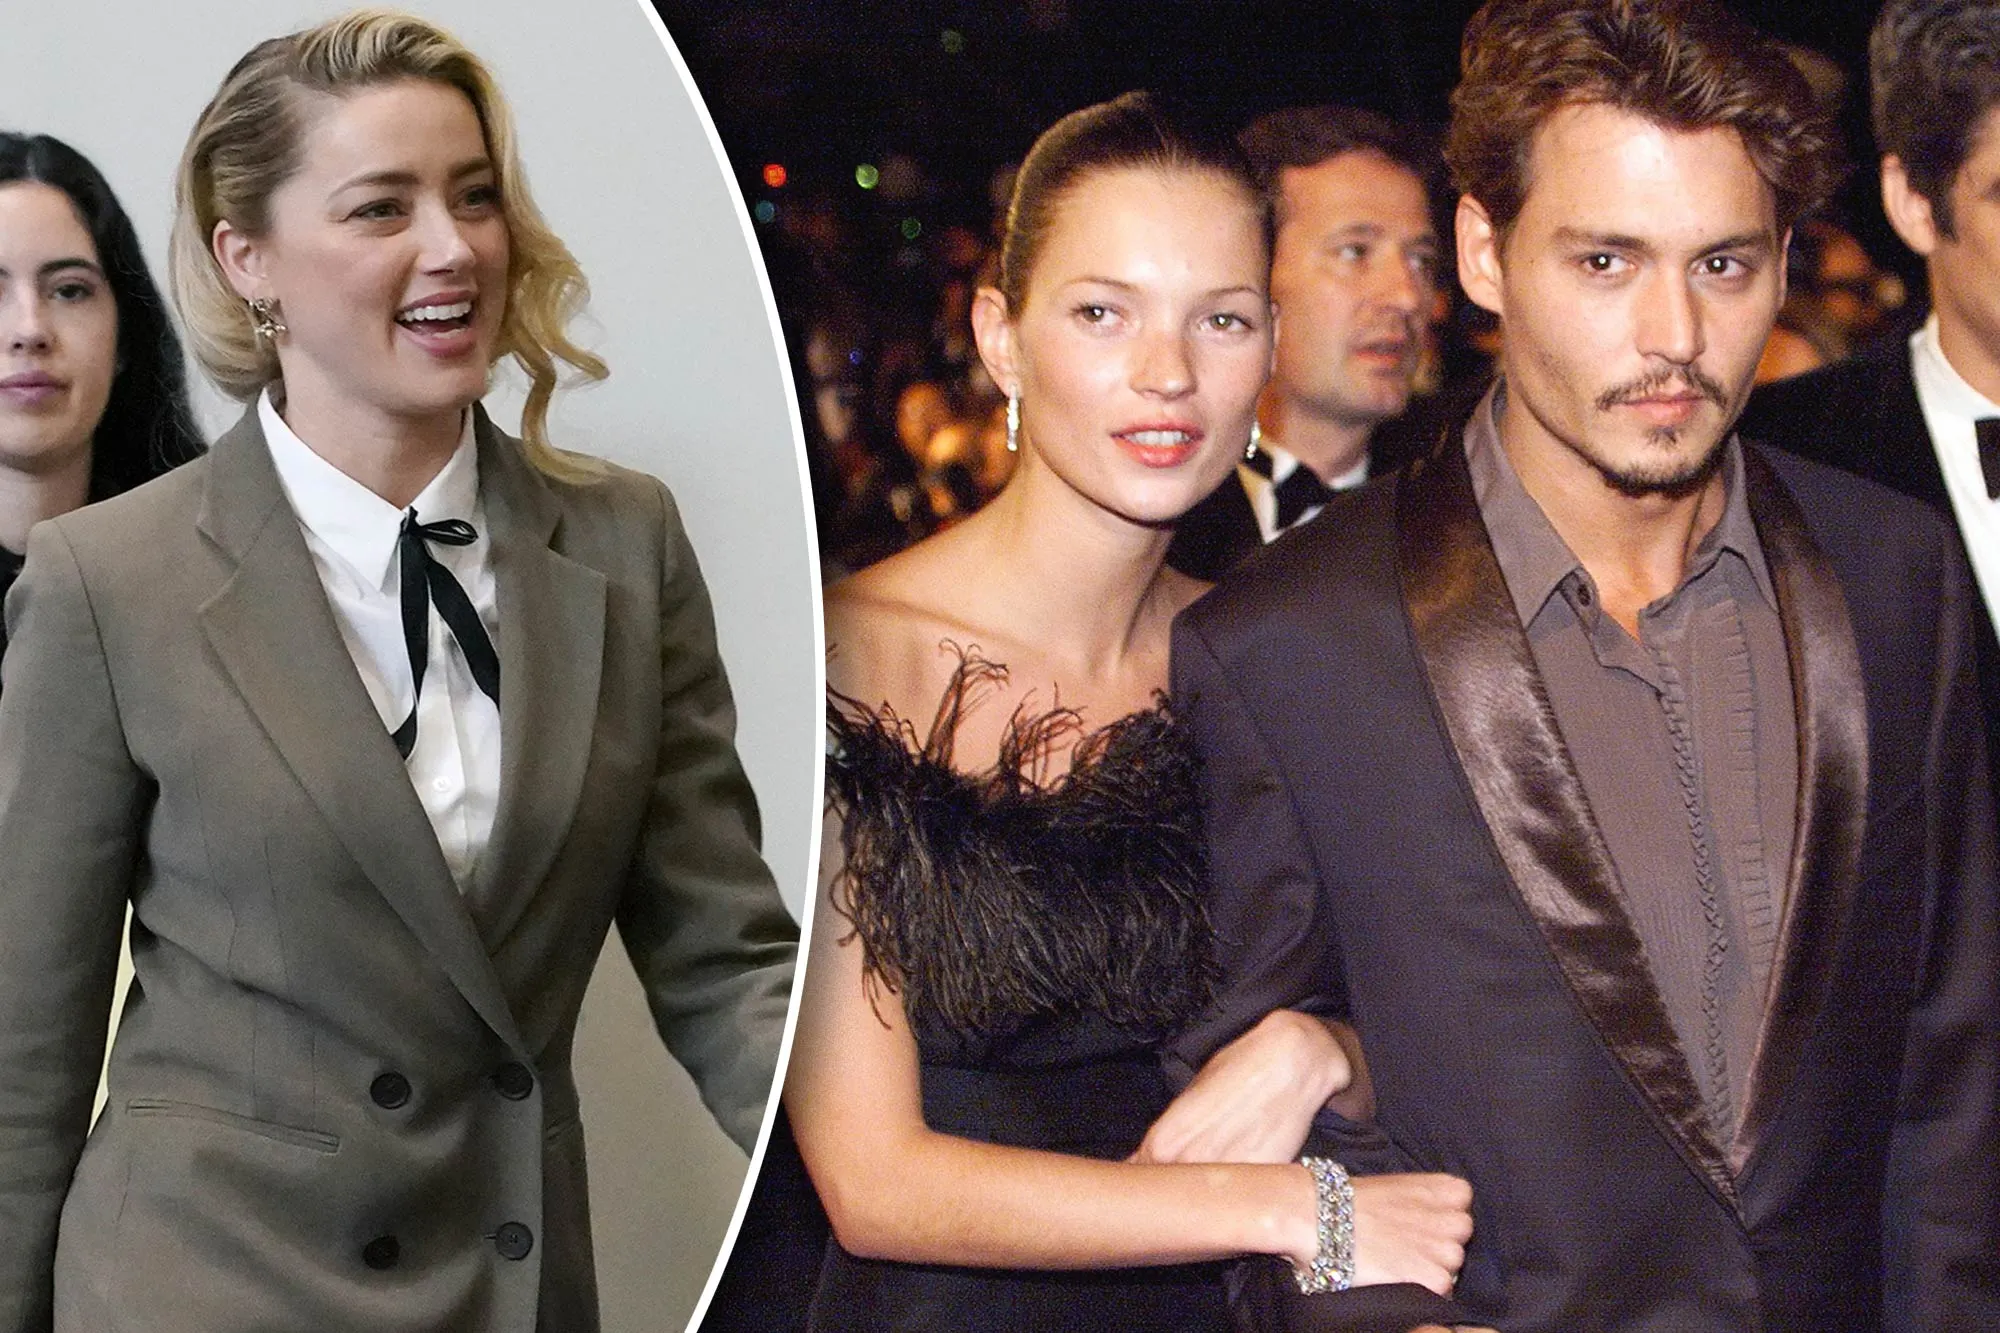 kate-moss-claims-johnny-depp-never-pushed-her-down-the-stairs